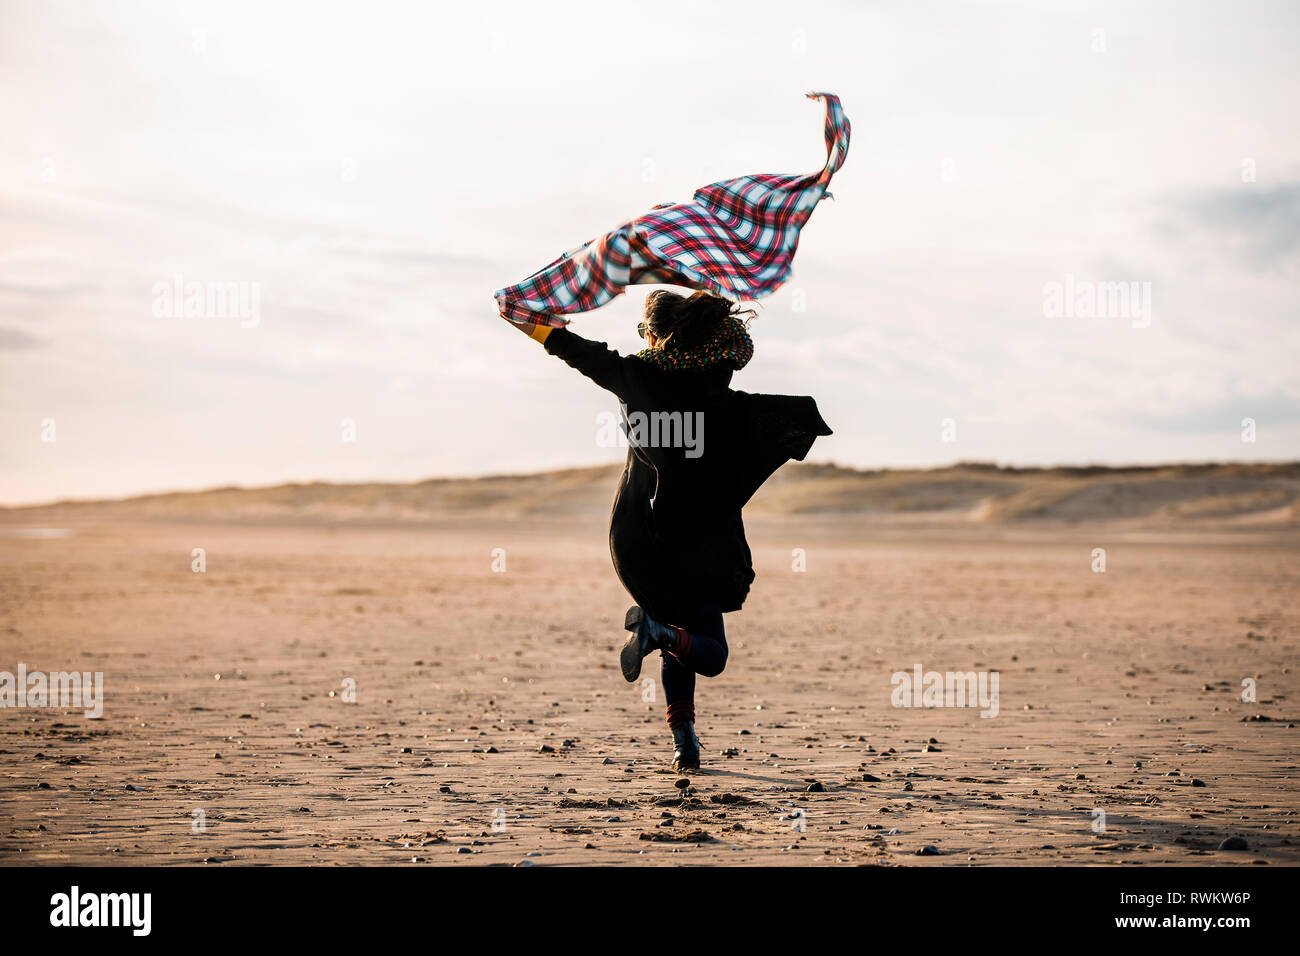 Woman running with beach blanket Banque D'Images